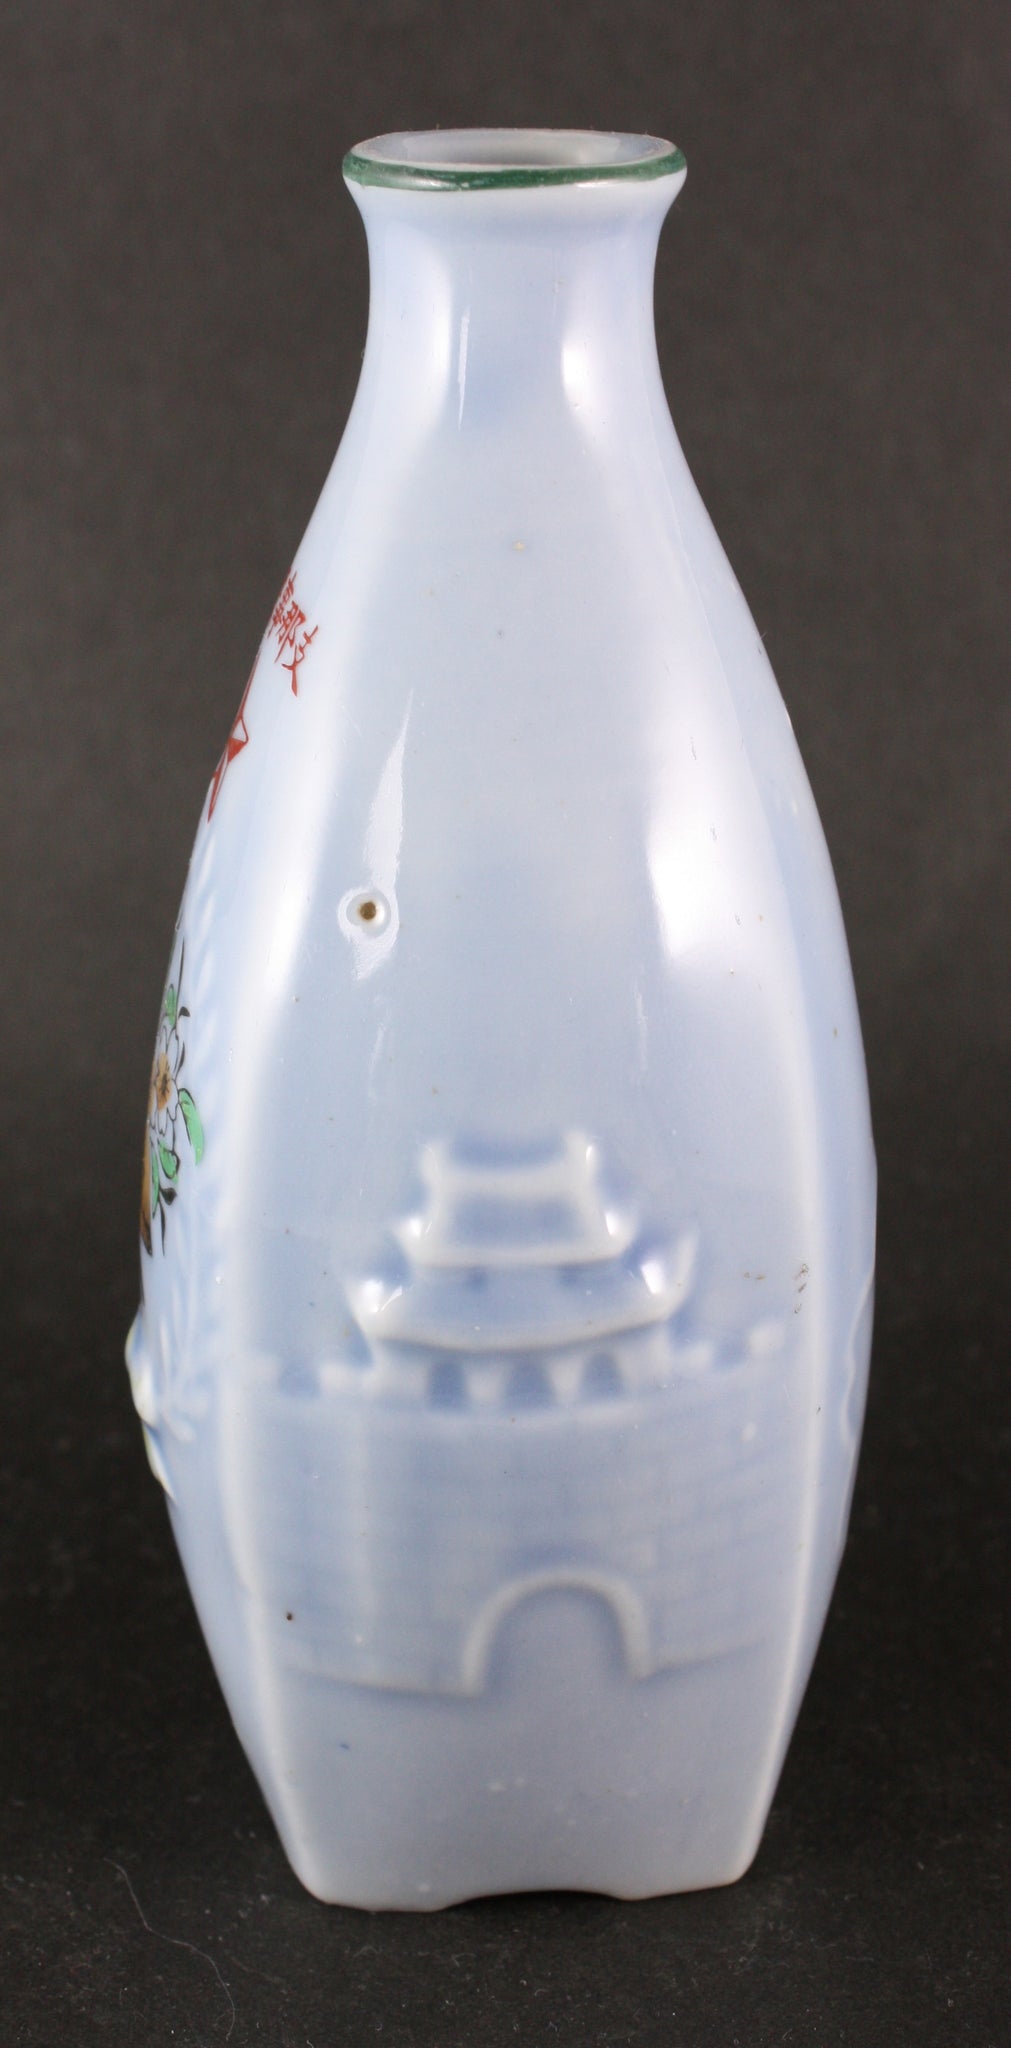 Antique Japanese Military China Incident Embossed City Gate Army Sake Bottle